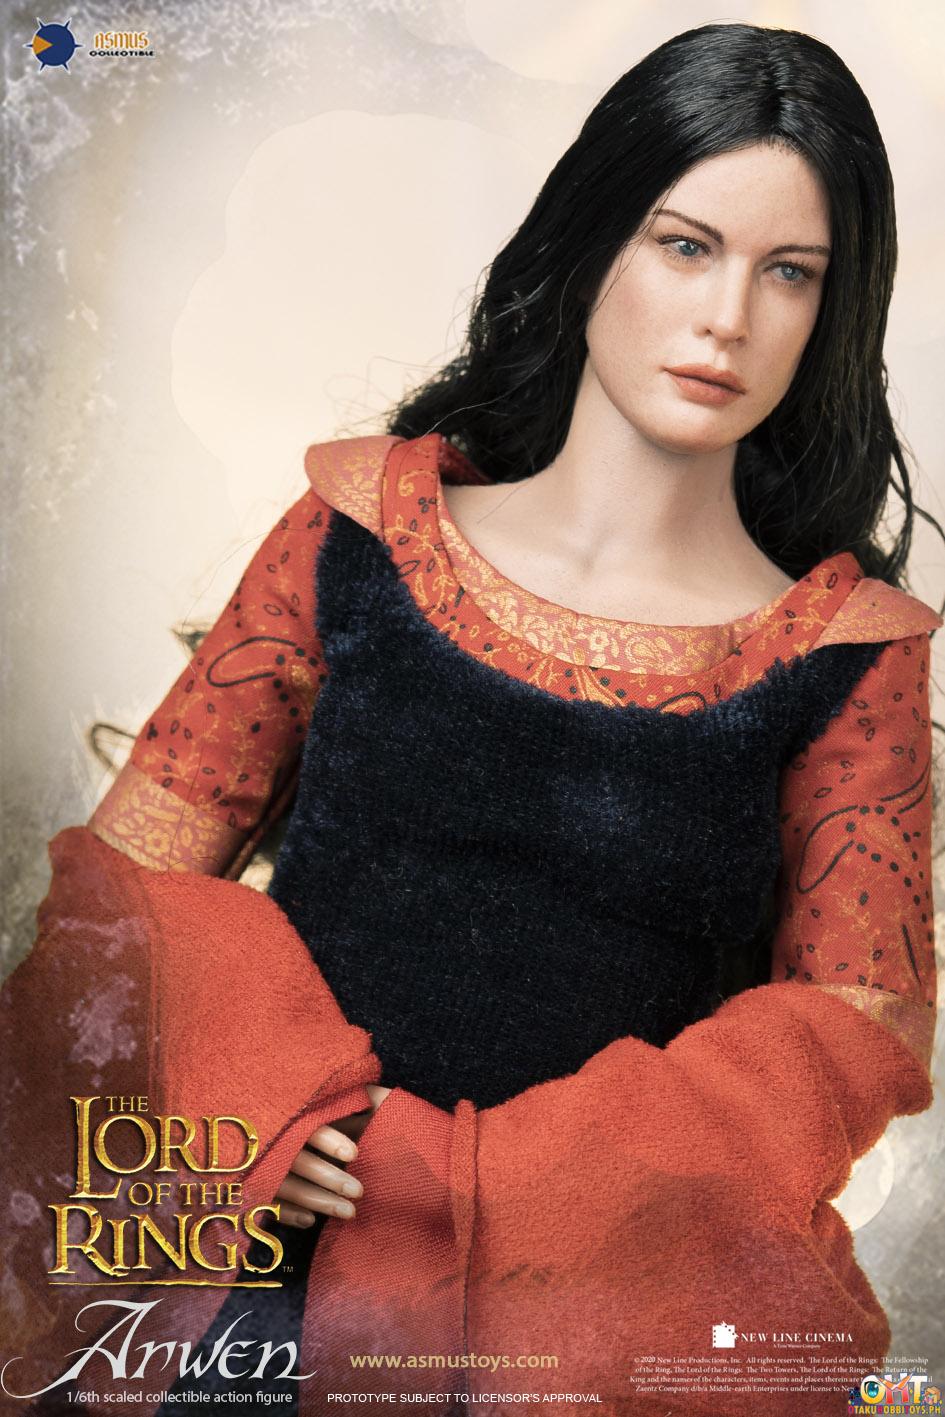 Asmus Toys LOTR028 The Lord of the Rings Series Arwen (Standard Edition)